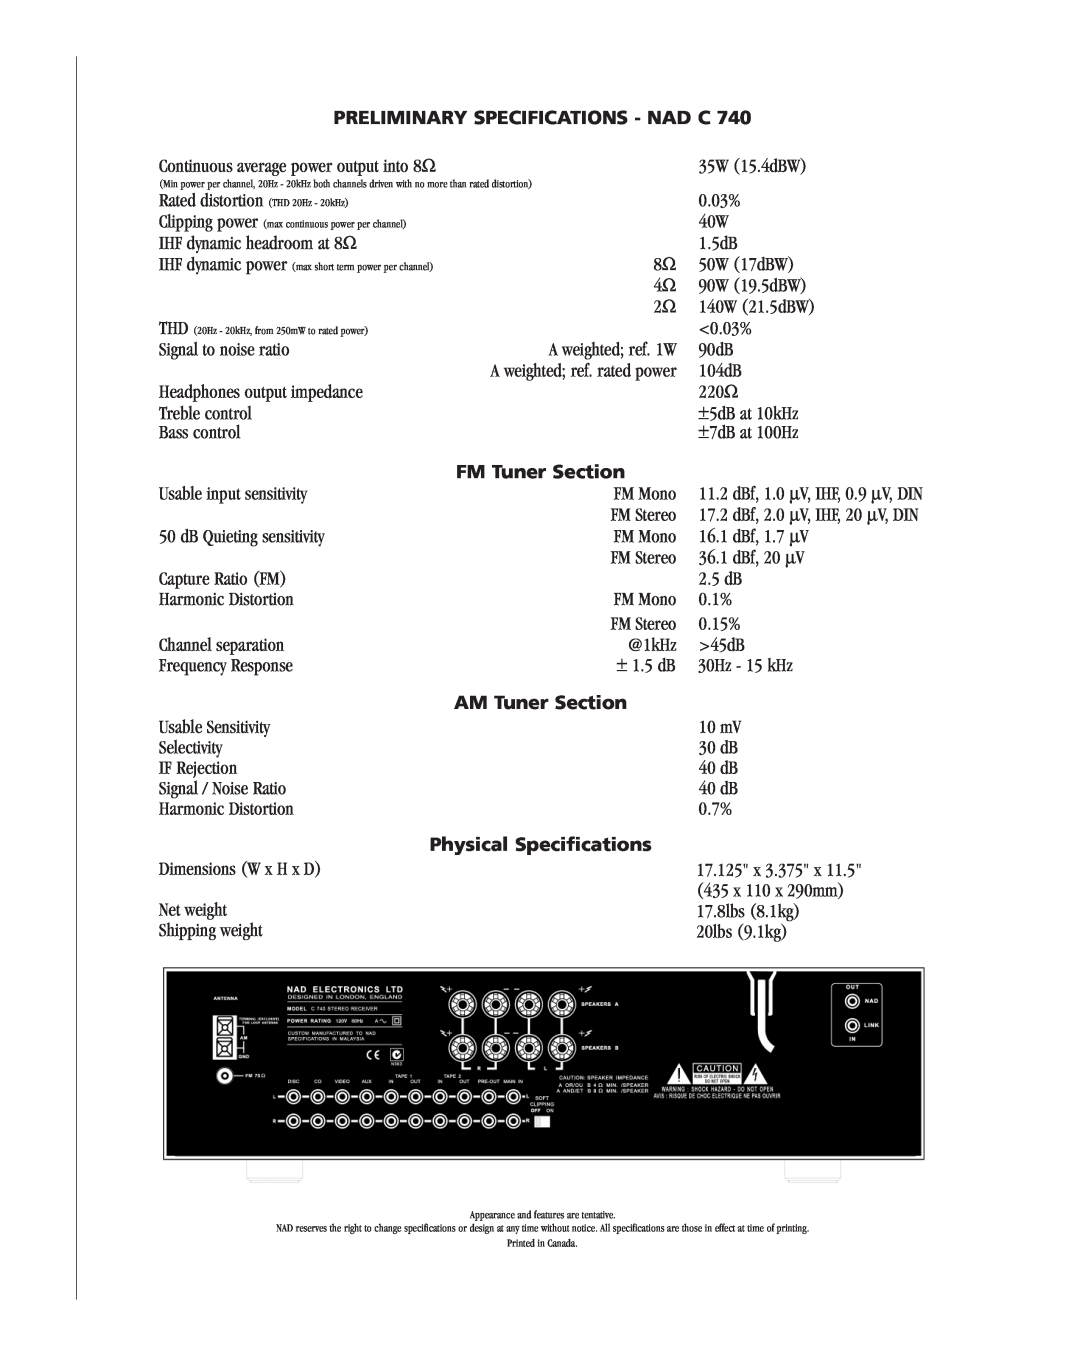 NAD C740 brochure Preliminary Specifications - Nad C, FM Tuner Section, AM Tuner Section, Physical Specifications 